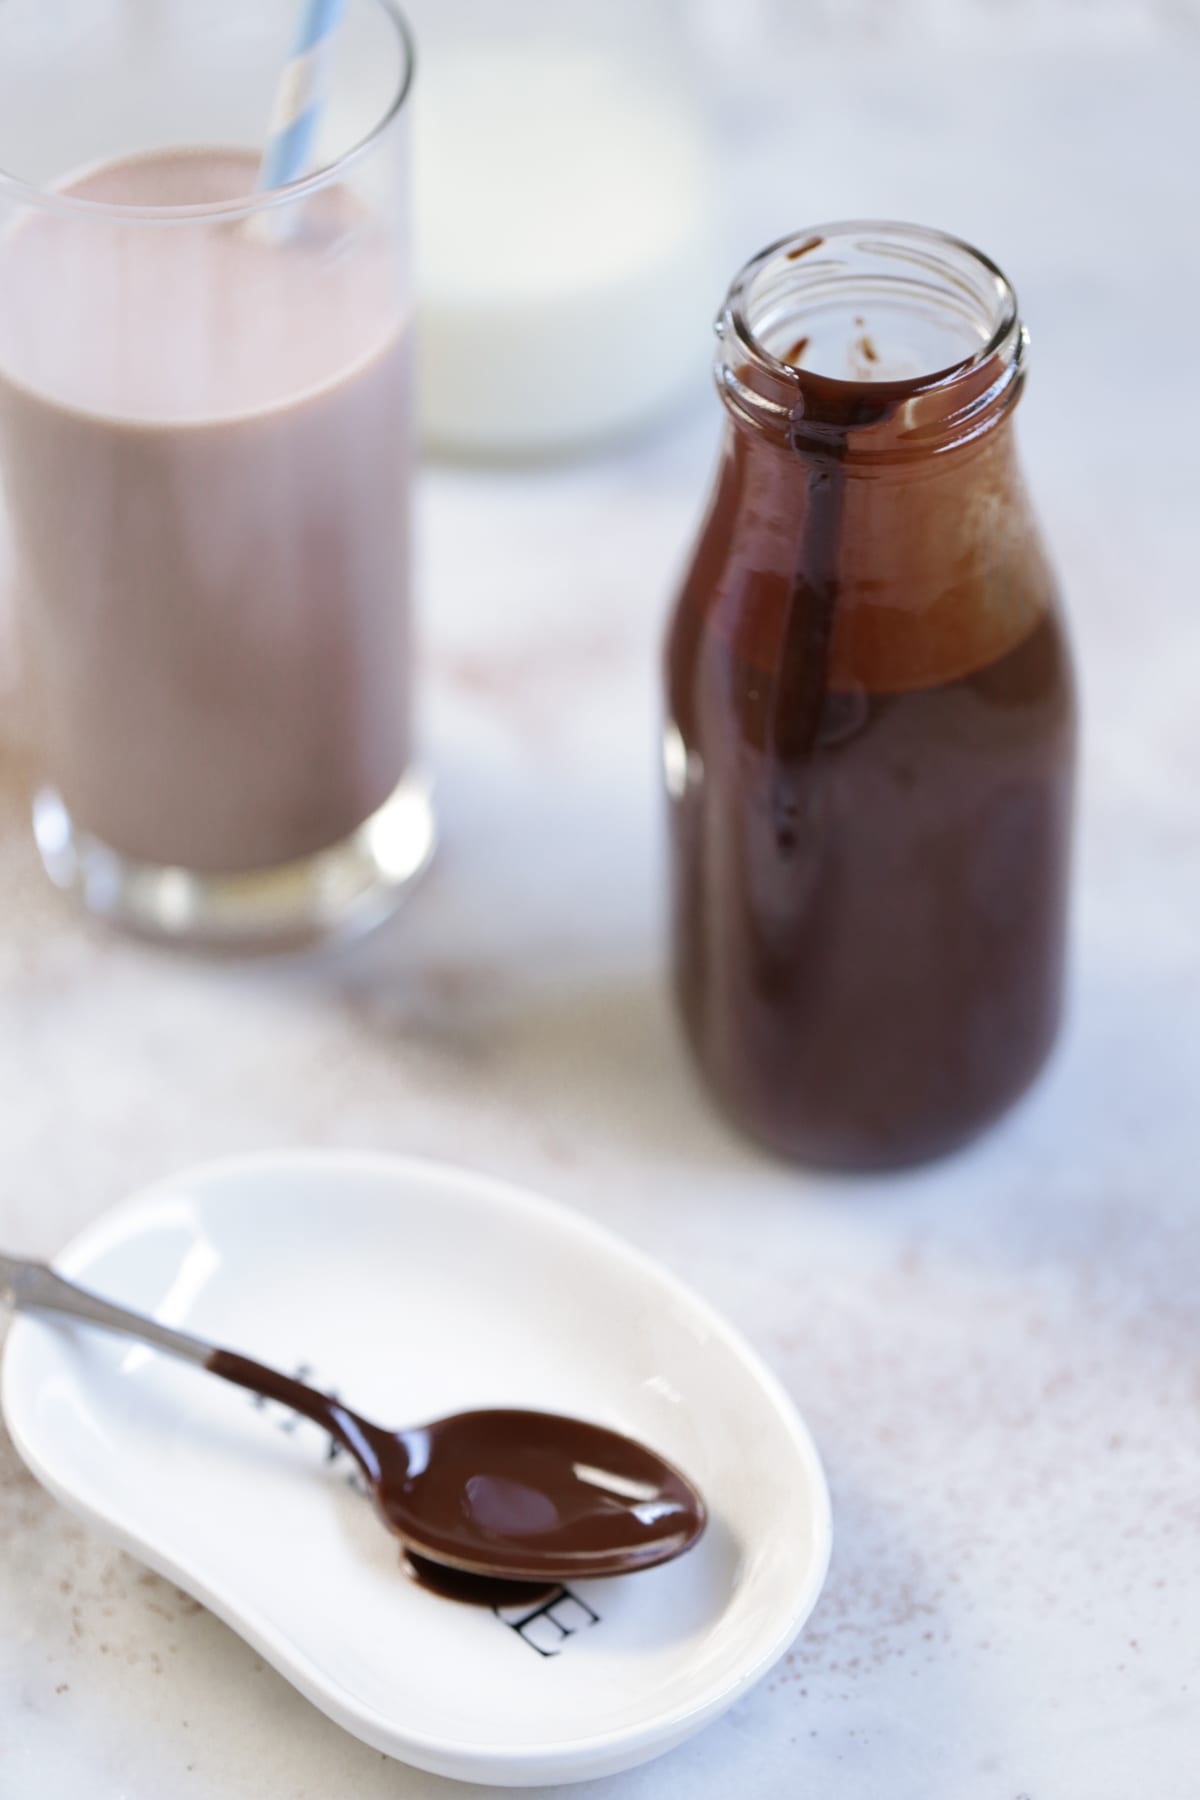 Homemade Chocolate Milk Syrup without refined sugars or artificial colors. The healthy, fun, and easy way to do chocolate milk. 